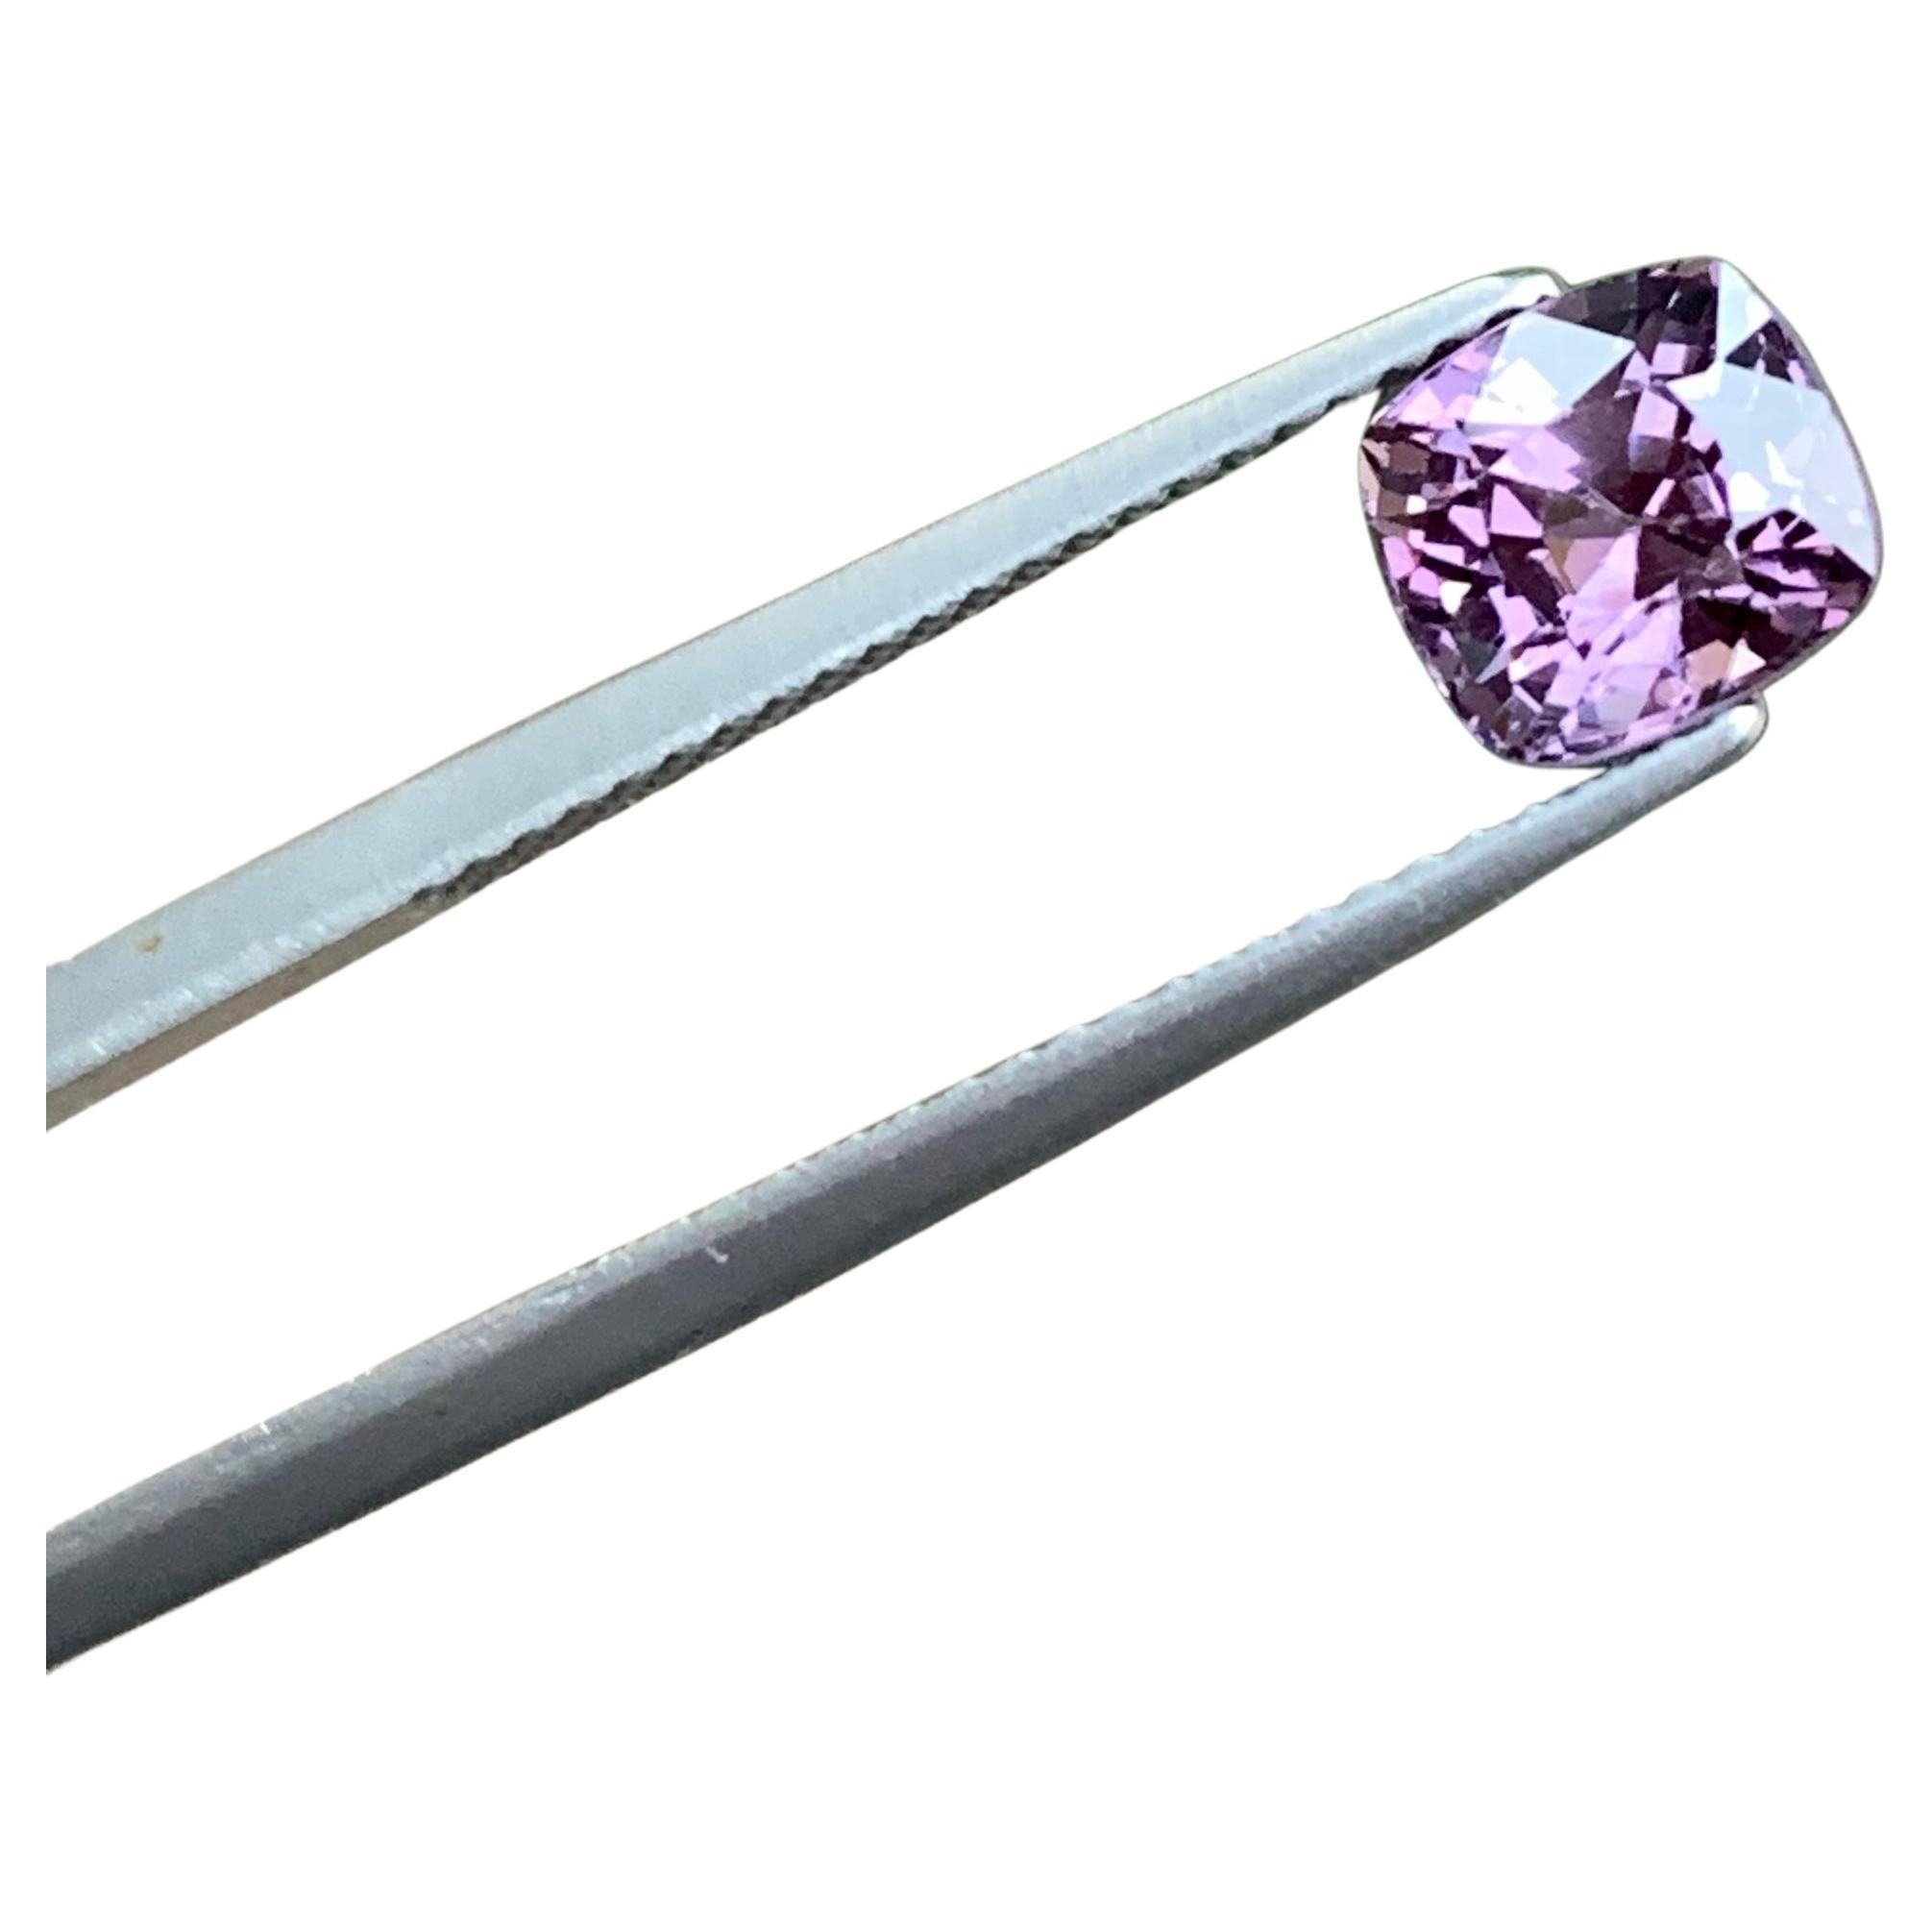 Precious Natural Spinel For Ring 1.75 CT Burma Spinel Gemstone For Jewelry Size 